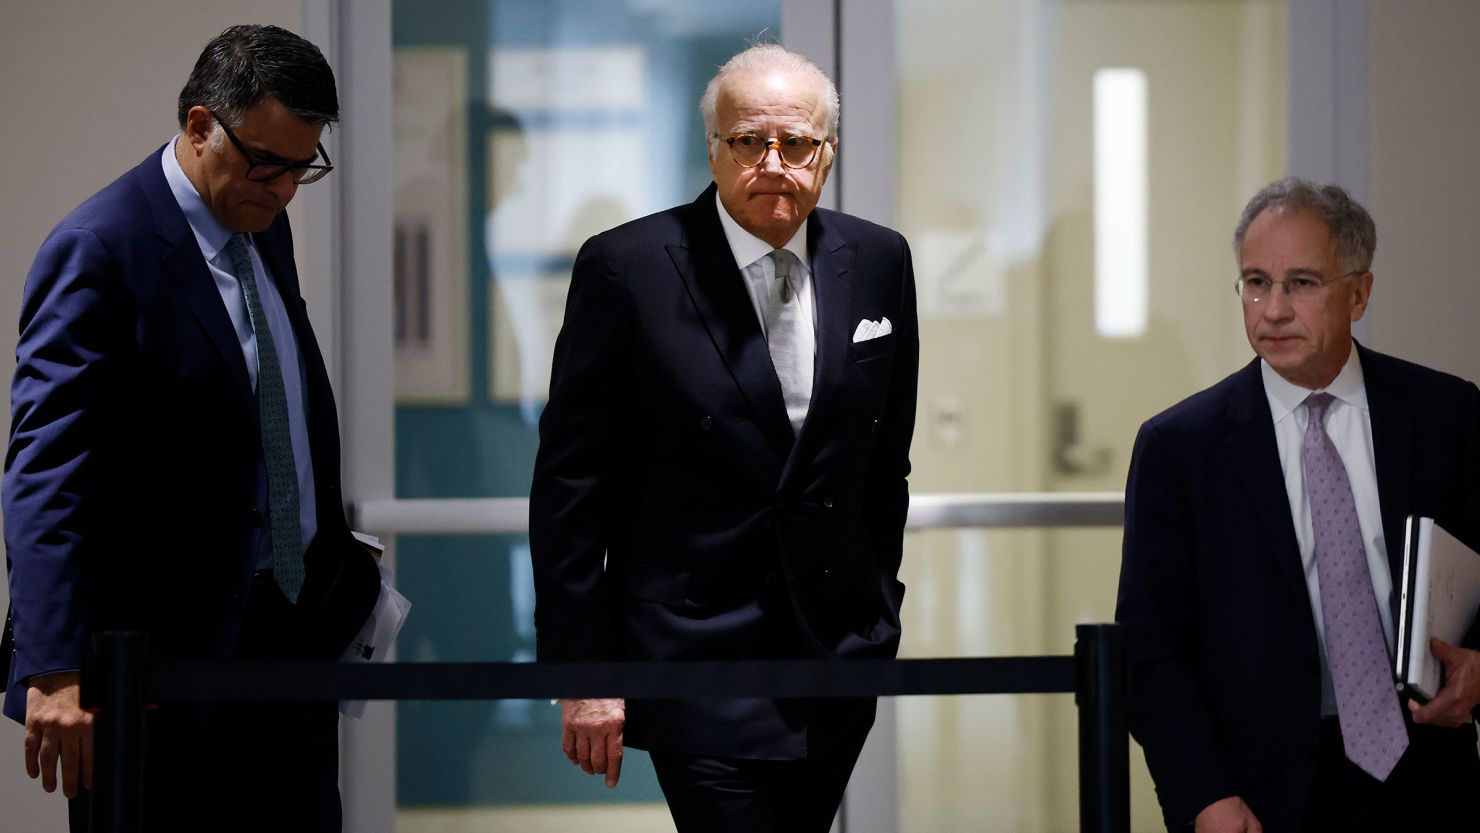 James Biden returns with his attorney Paul Fishman, right, following a break in a closed-door deposition with the House Oversight Committee at the Thomas P. O'Neill Jr. Federal Building on February 21 in Washington, DC.